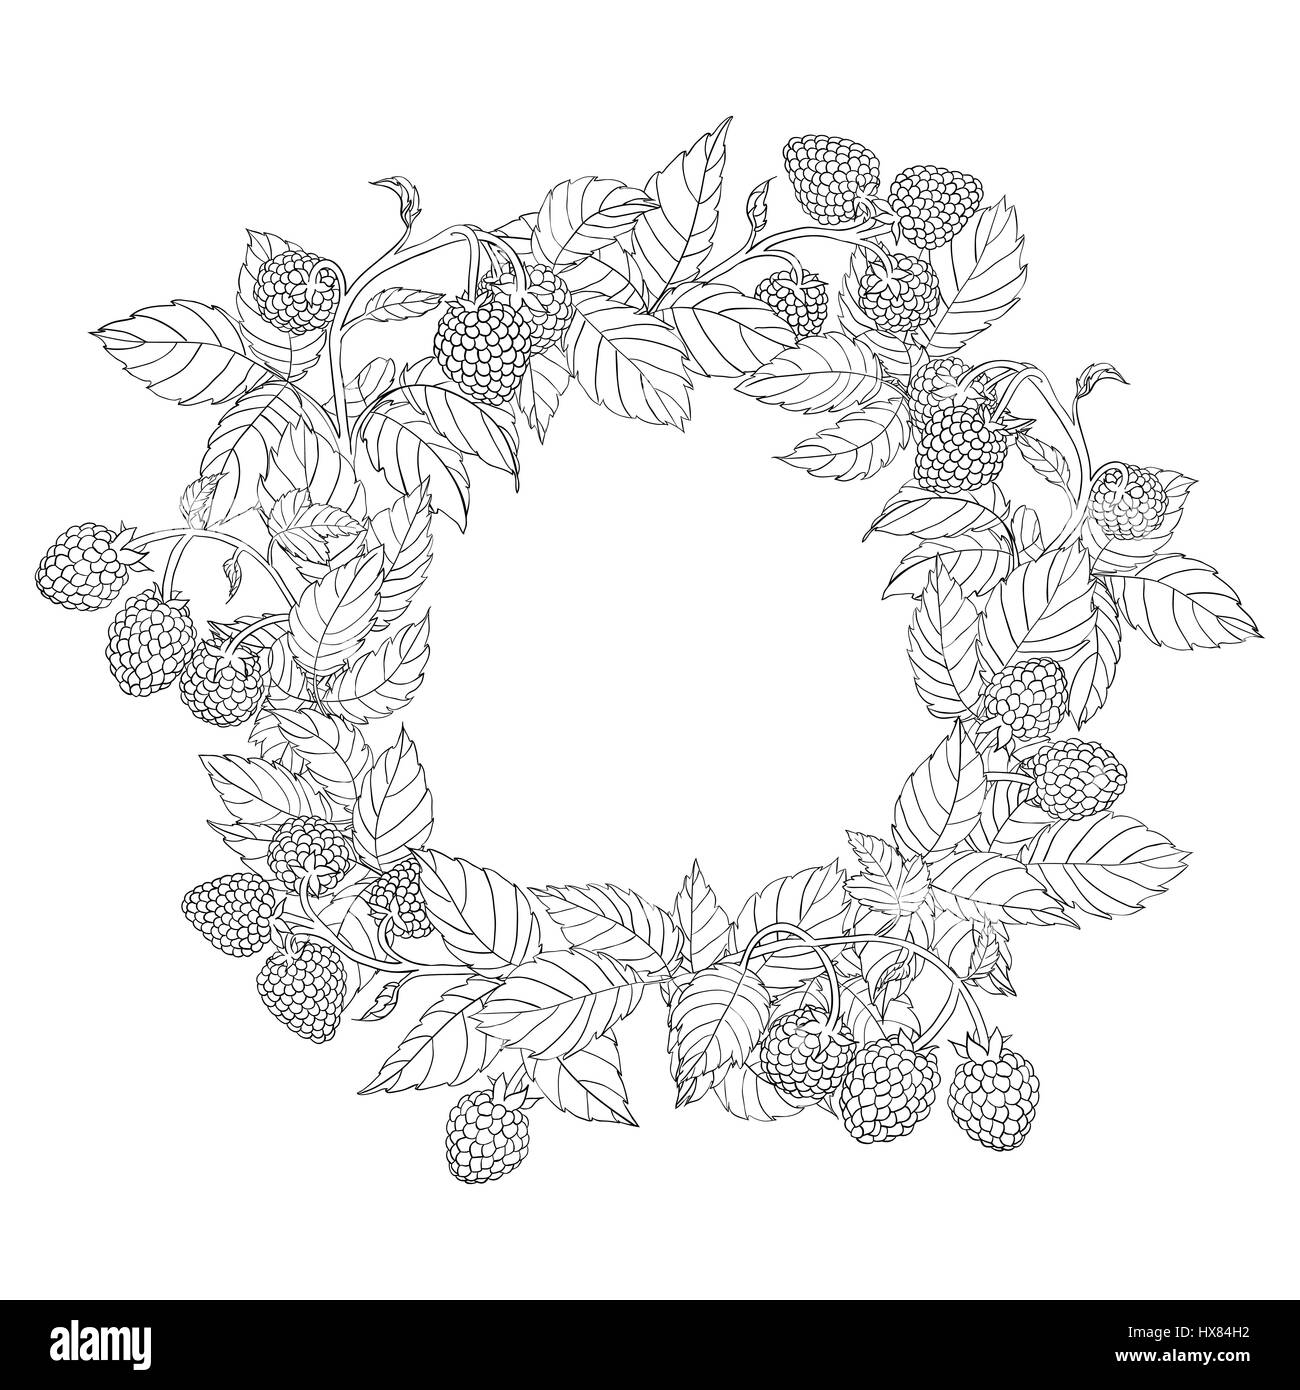 Round wreath or frame of raspberry with leaves and berries on a white background. Branches painted dark tench and filled with white. Isolated. Stock Vector